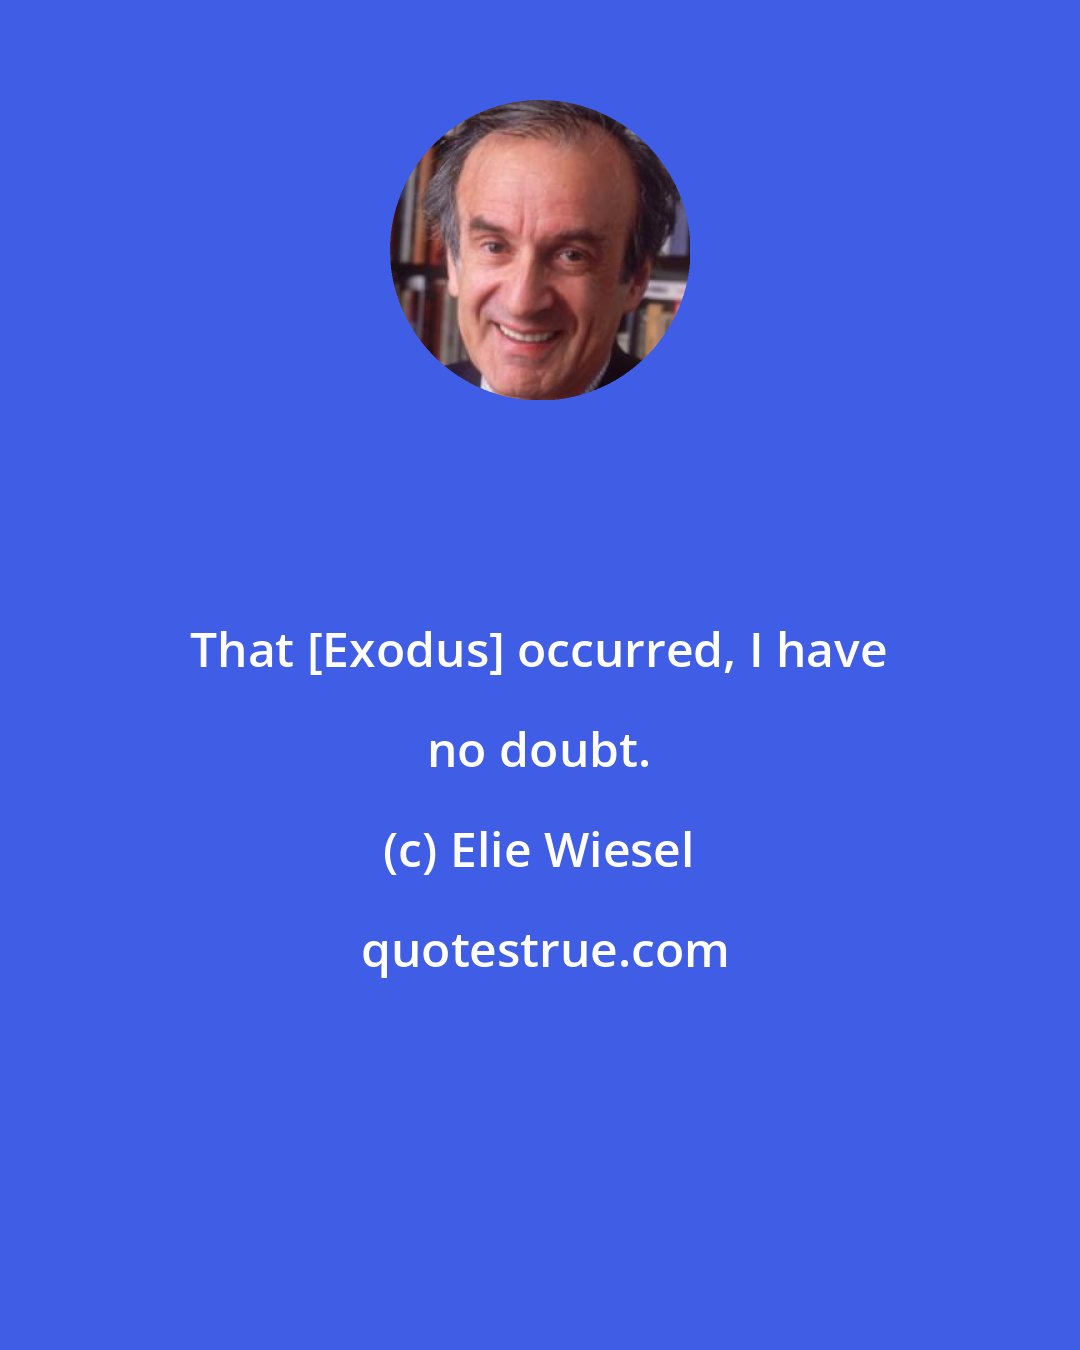 Elie Wiesel: That [Exodus] occurred, I have no doubt.